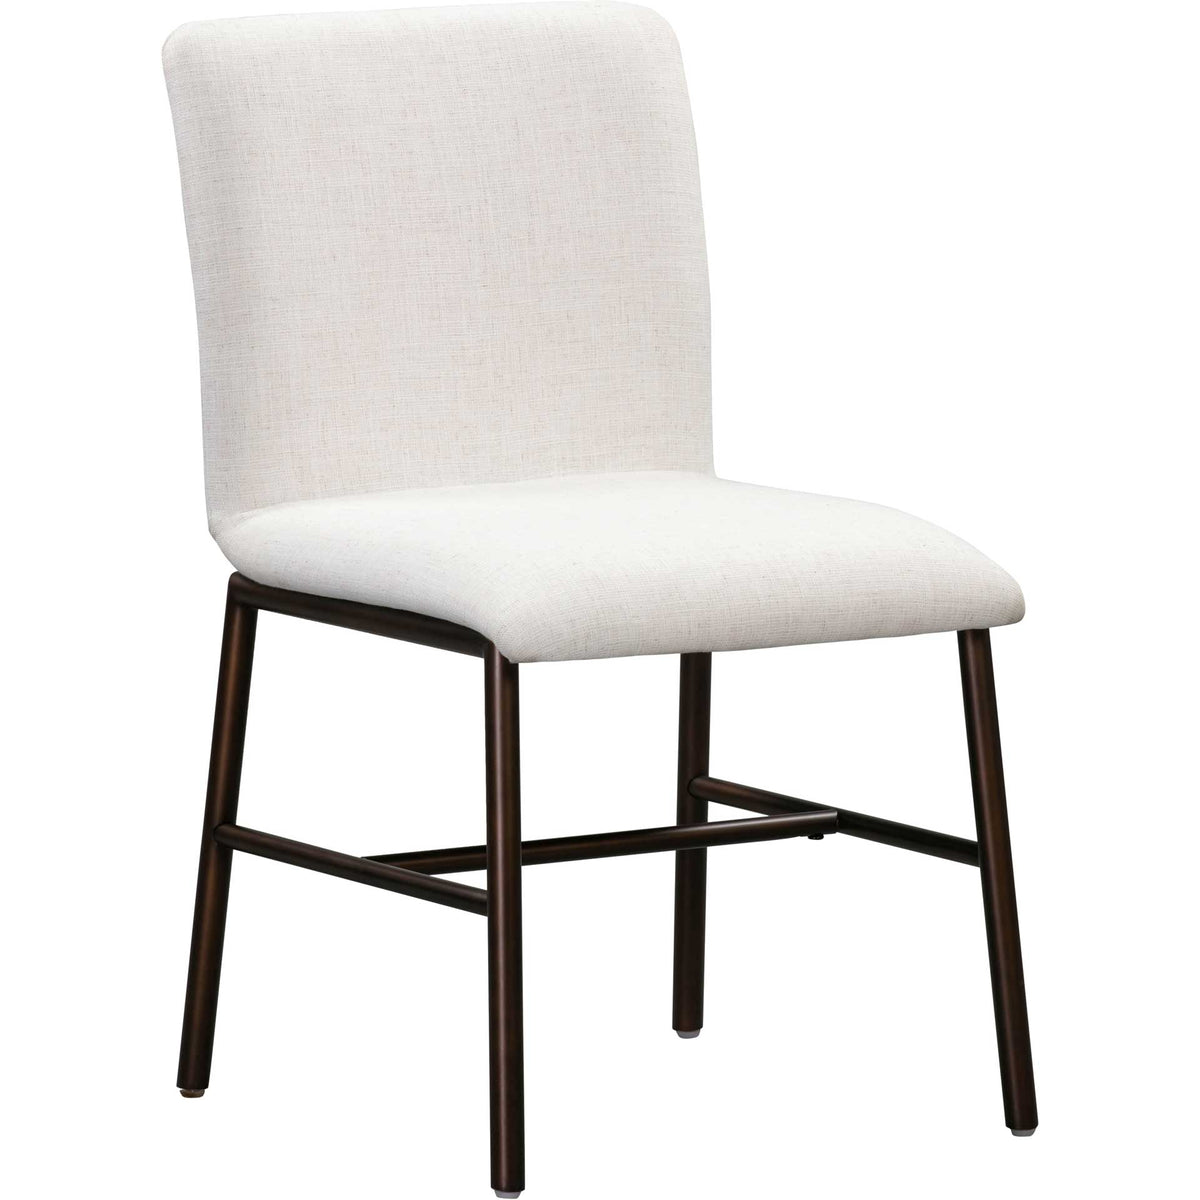 Boston Upholstered Dining Chair Flax (Set of 2)